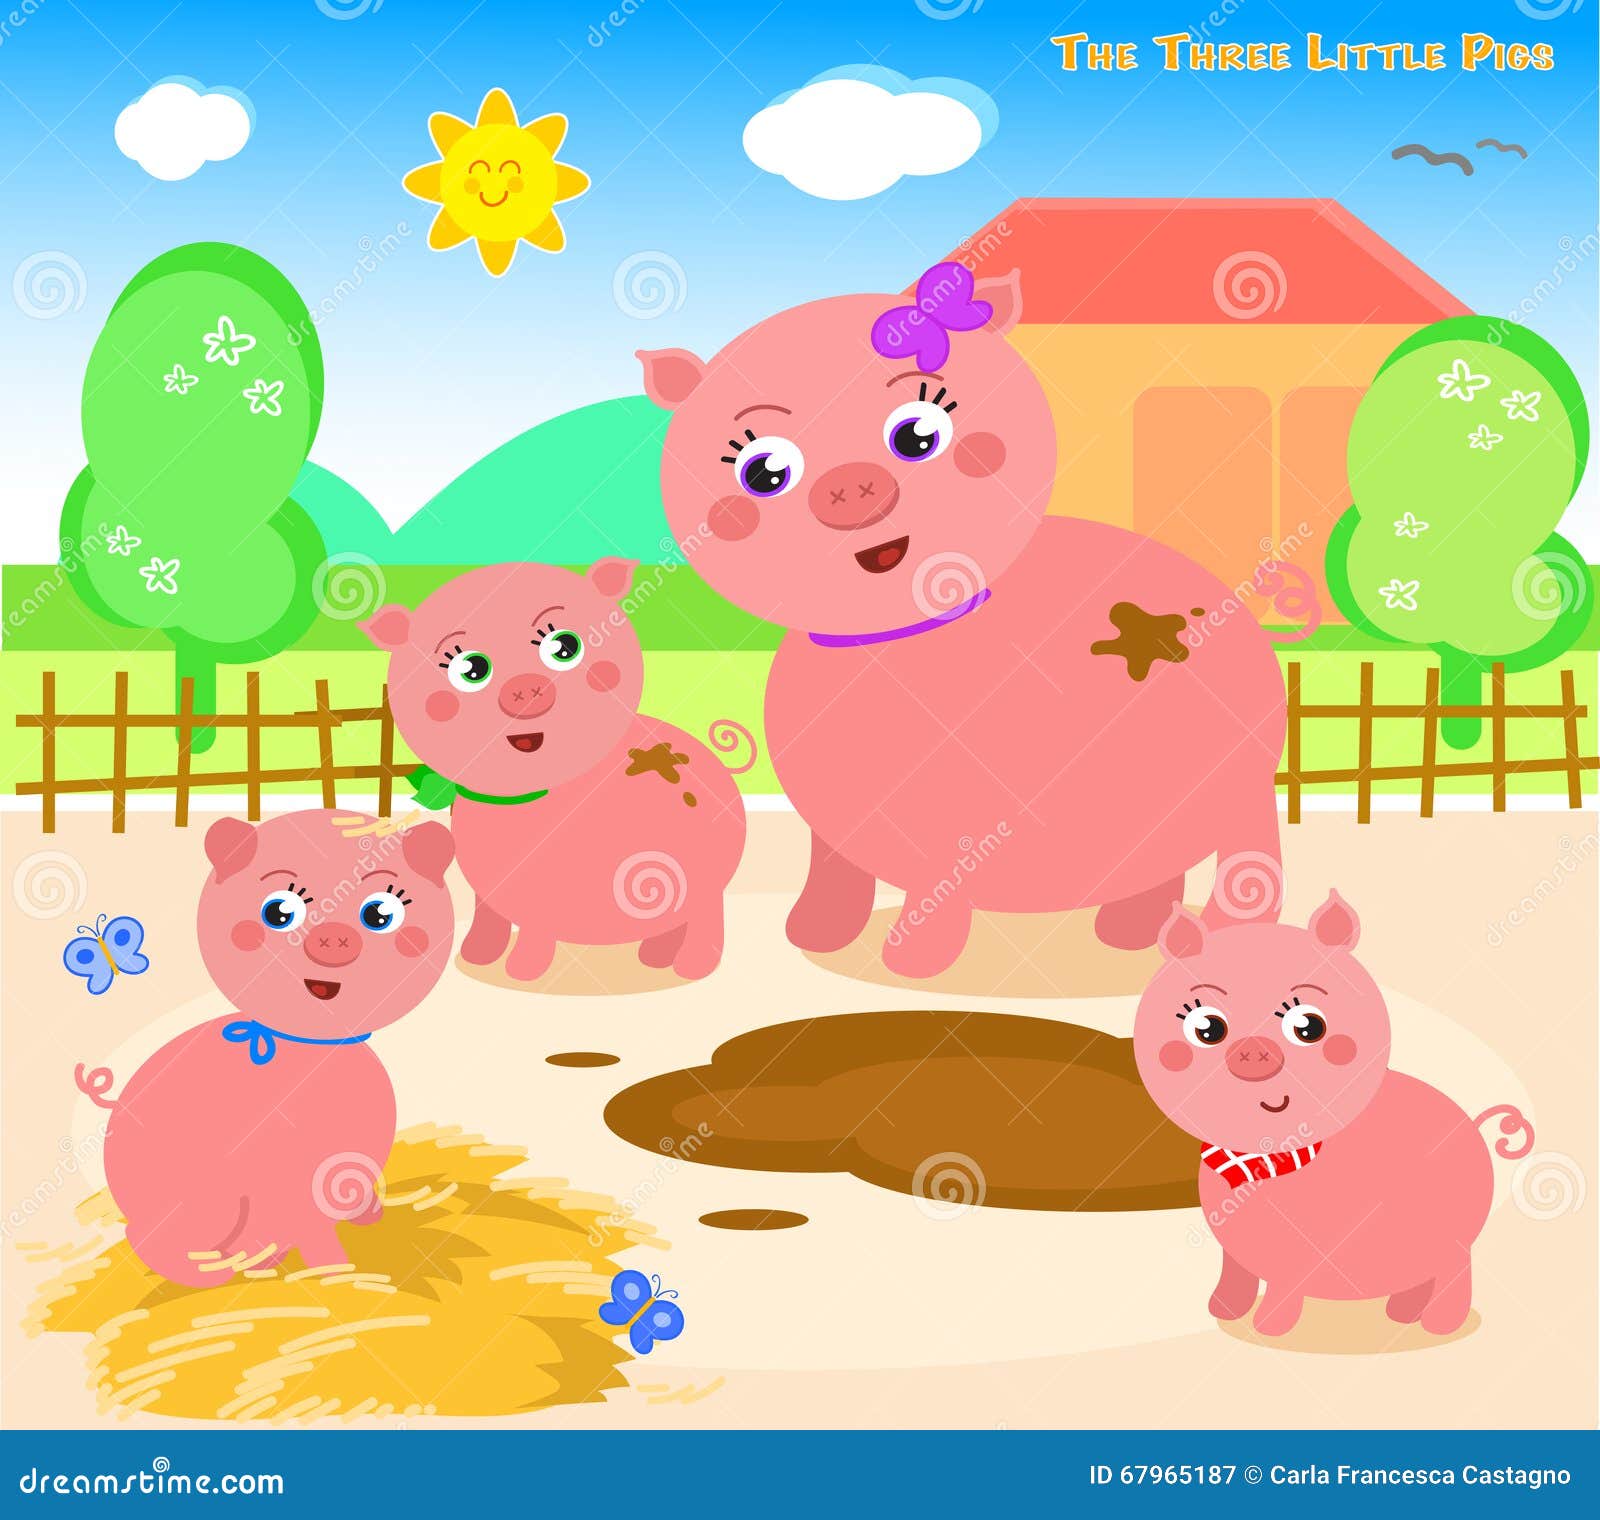 mother pig clipart - photo #28